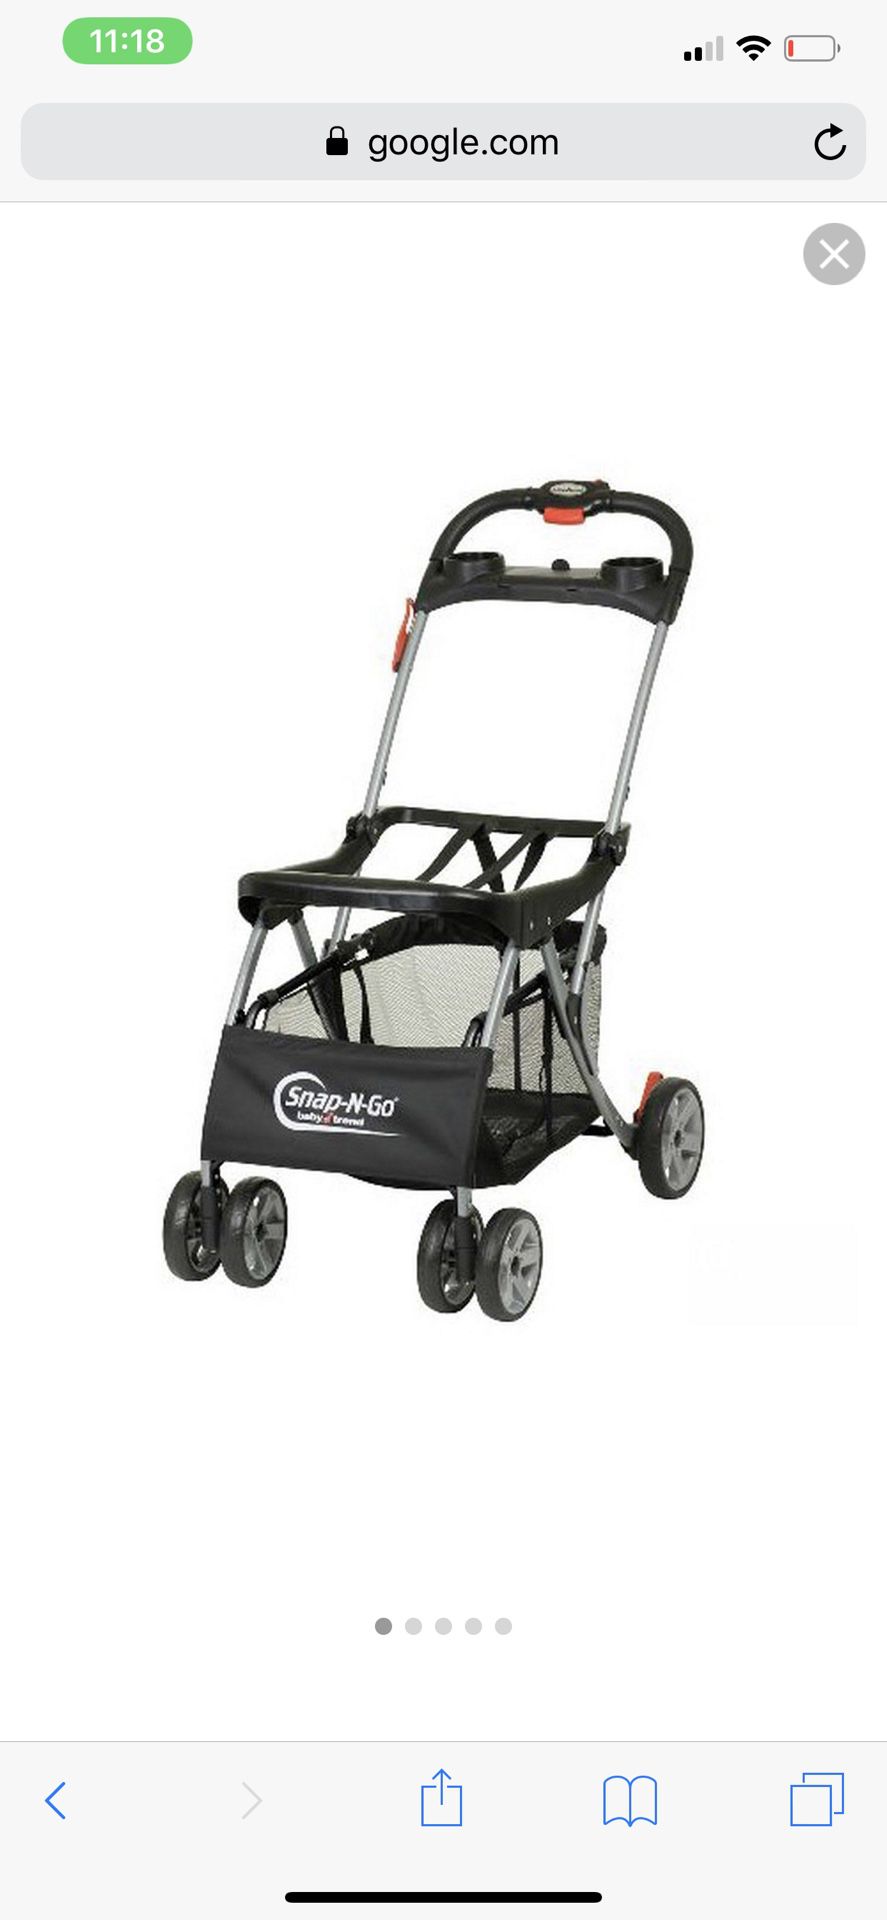 Snap and go stroller